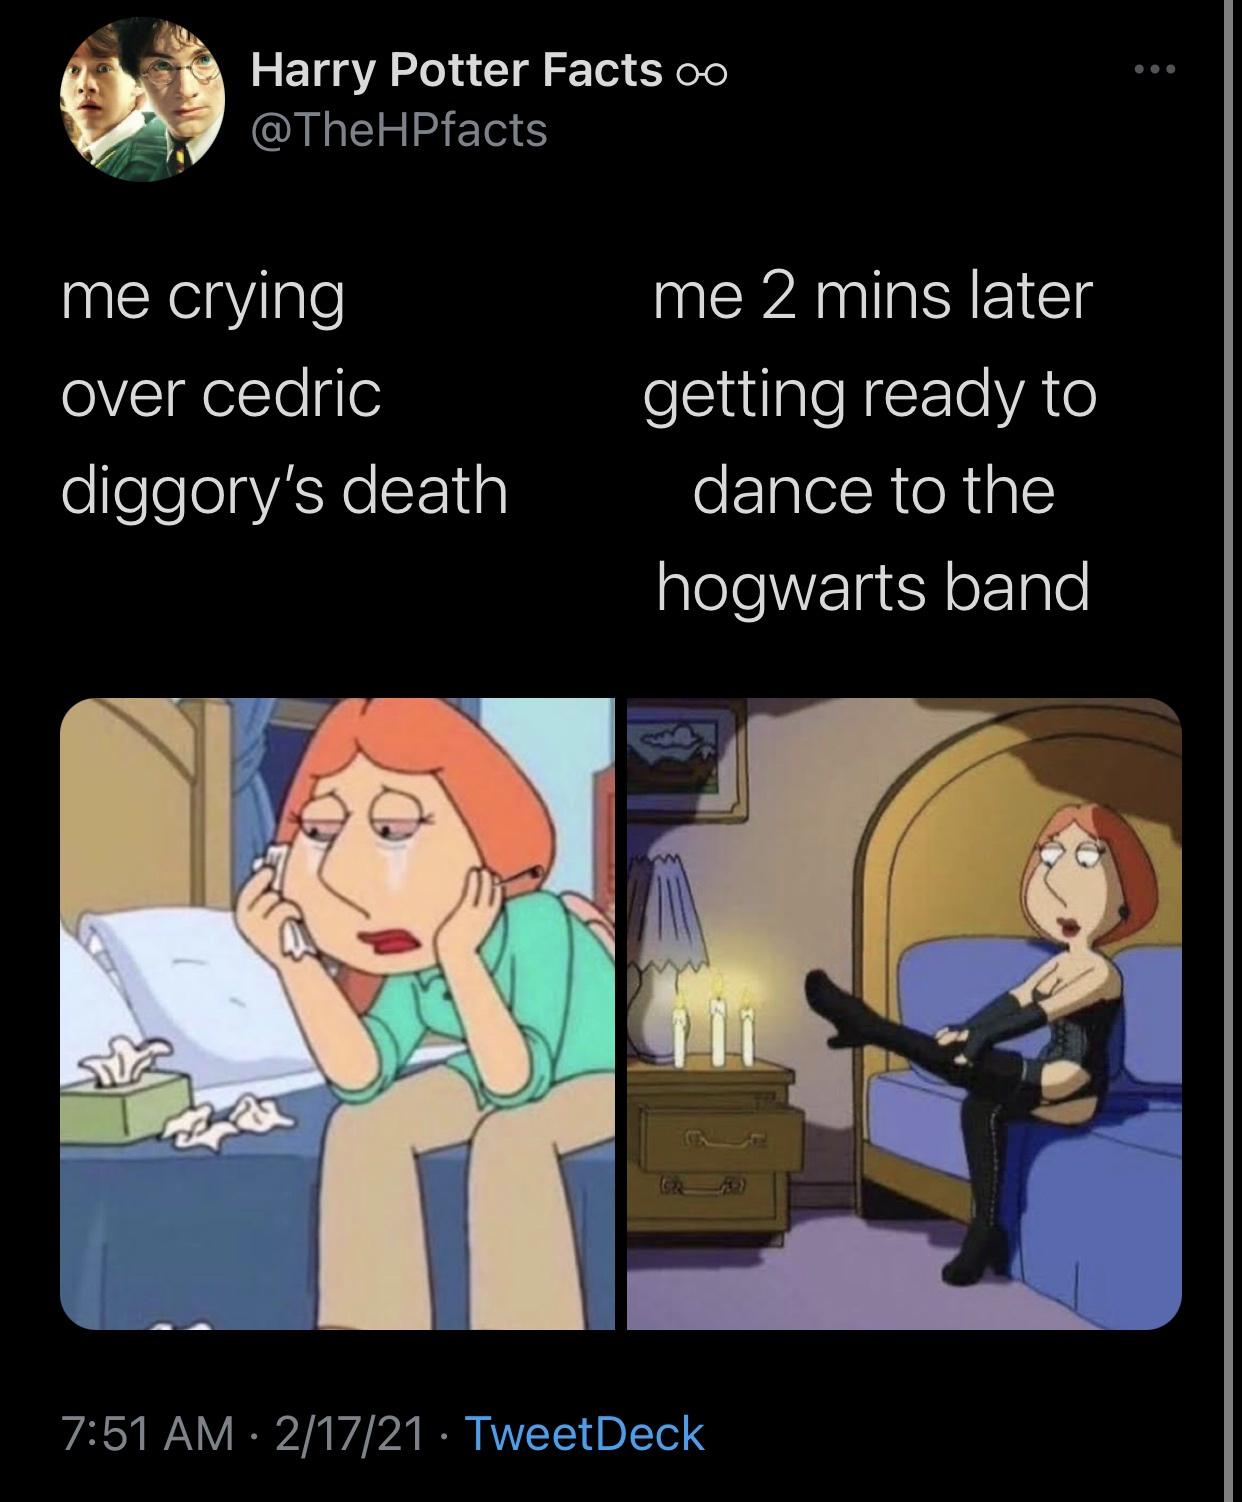 cartoon - Harry Potter Facts oo me crying over cedric diggory's death me 2 mins later getting ready to dance to the hogwarts band 21721 TweetDeck